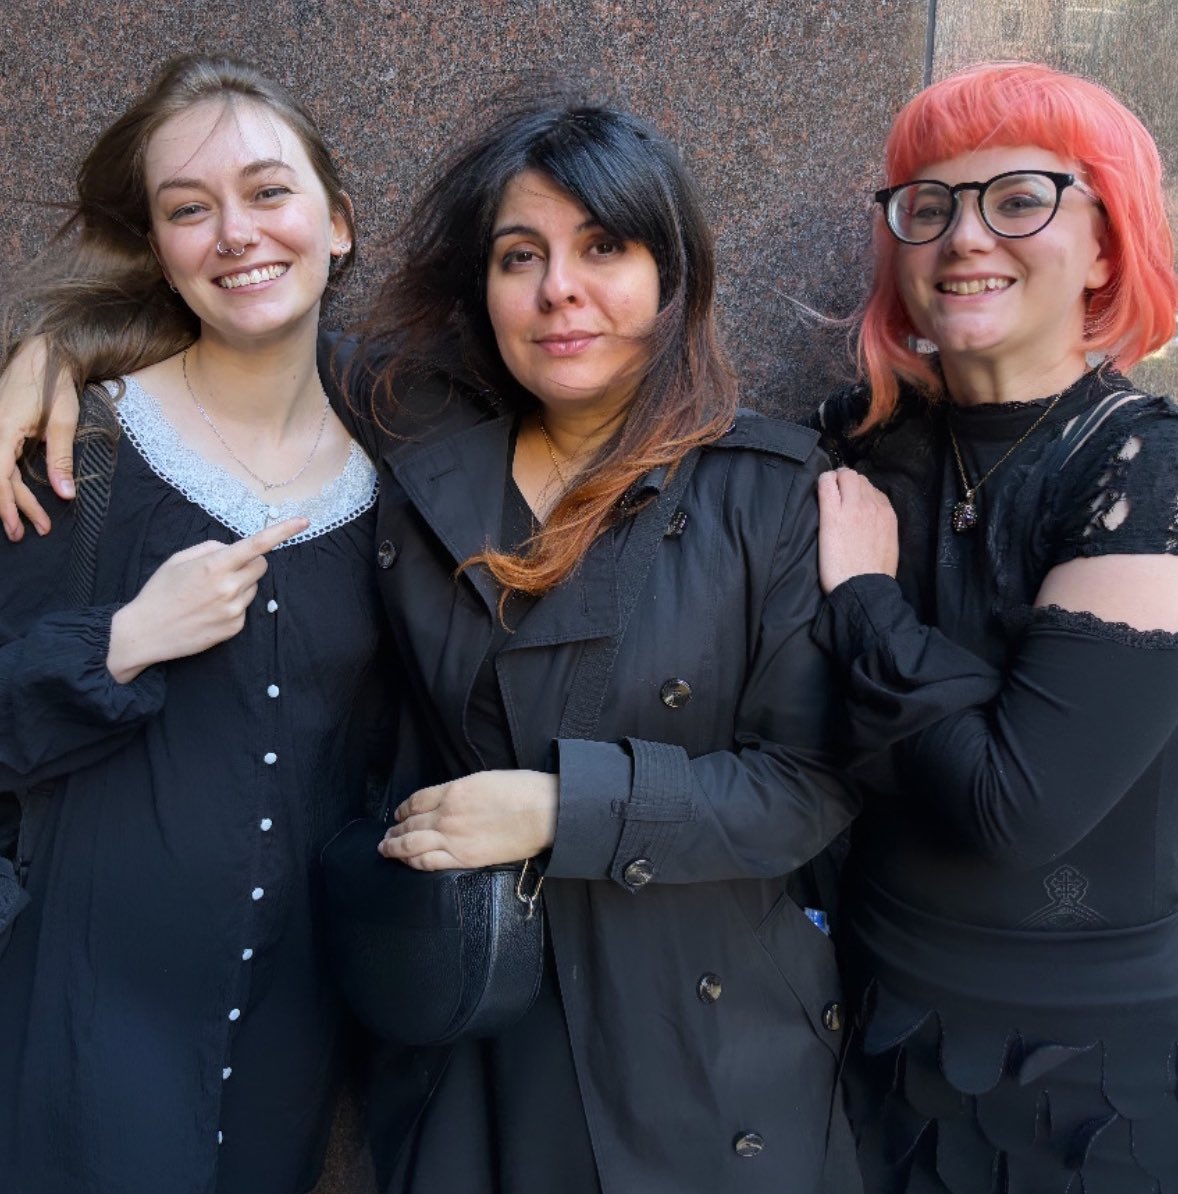 I’m so grateful for these women and our lawyers. We’re making history together as the largest copyright lawsuit in history moves forward. @SarahCAndersen @kortizart